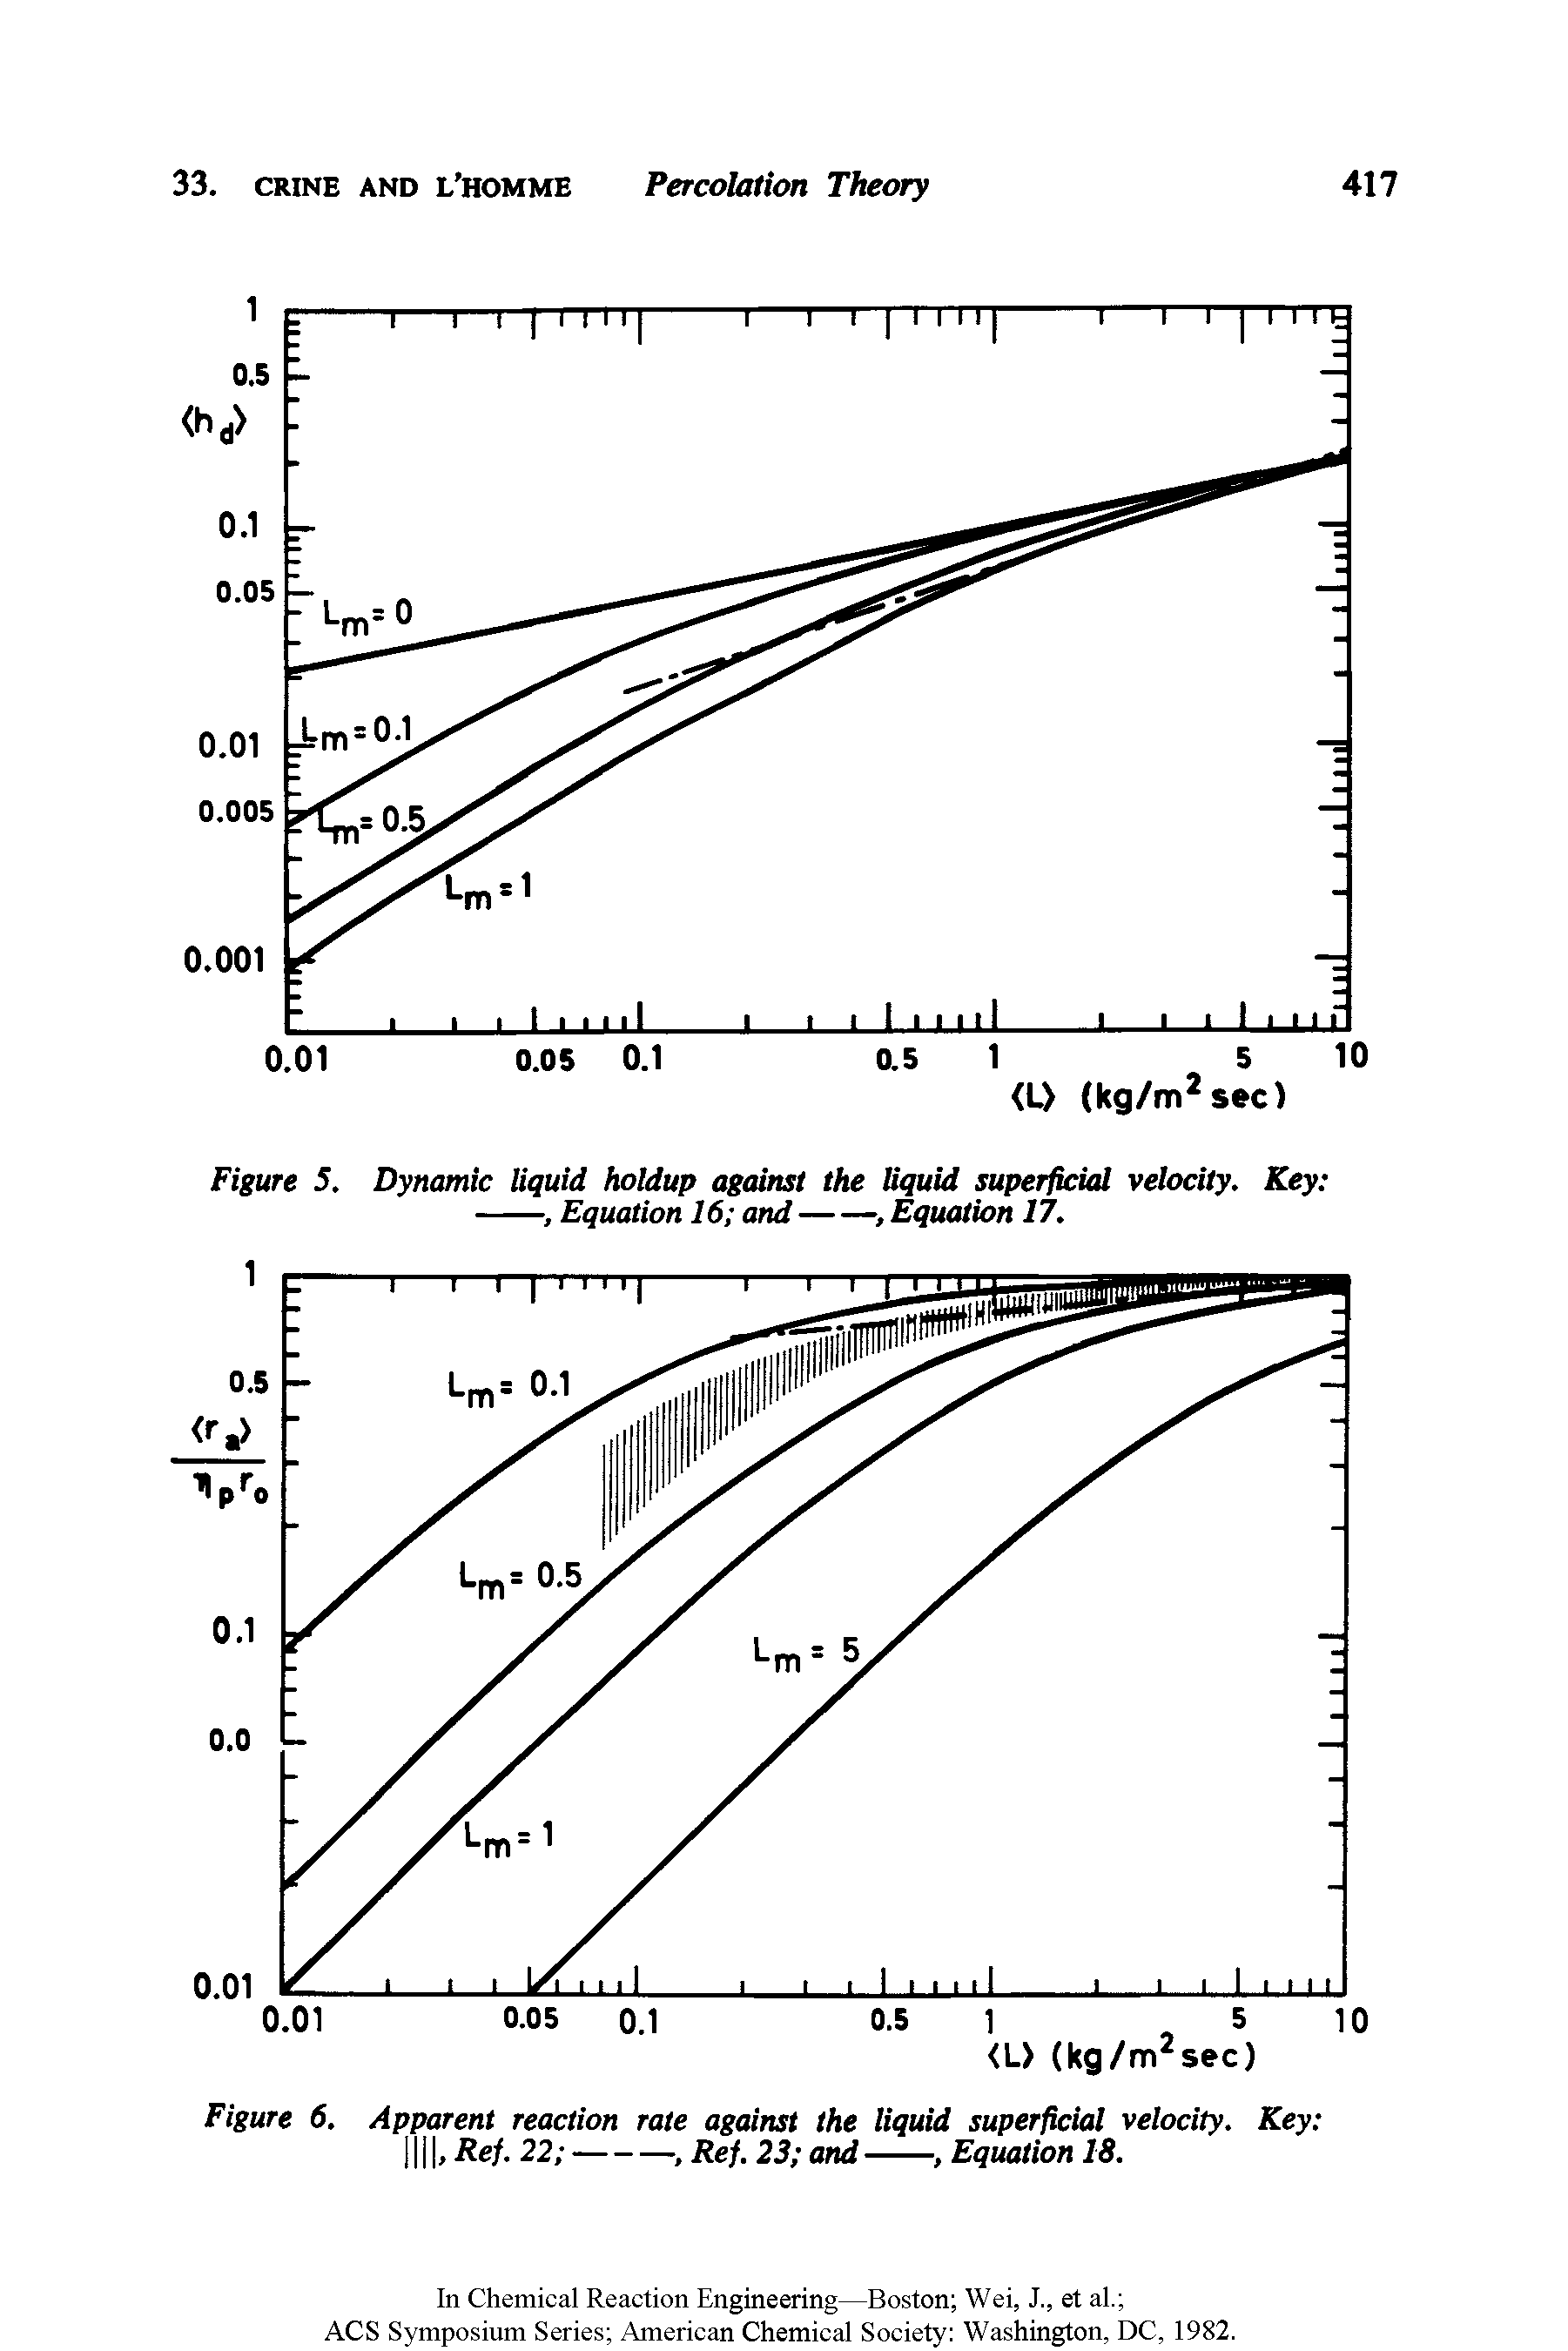 Figure 6. Apparent reaction rate against the liquid superficial velocity. Key , Ref. 22 ------------------------, Ref. 23 and-------, Equation 18.